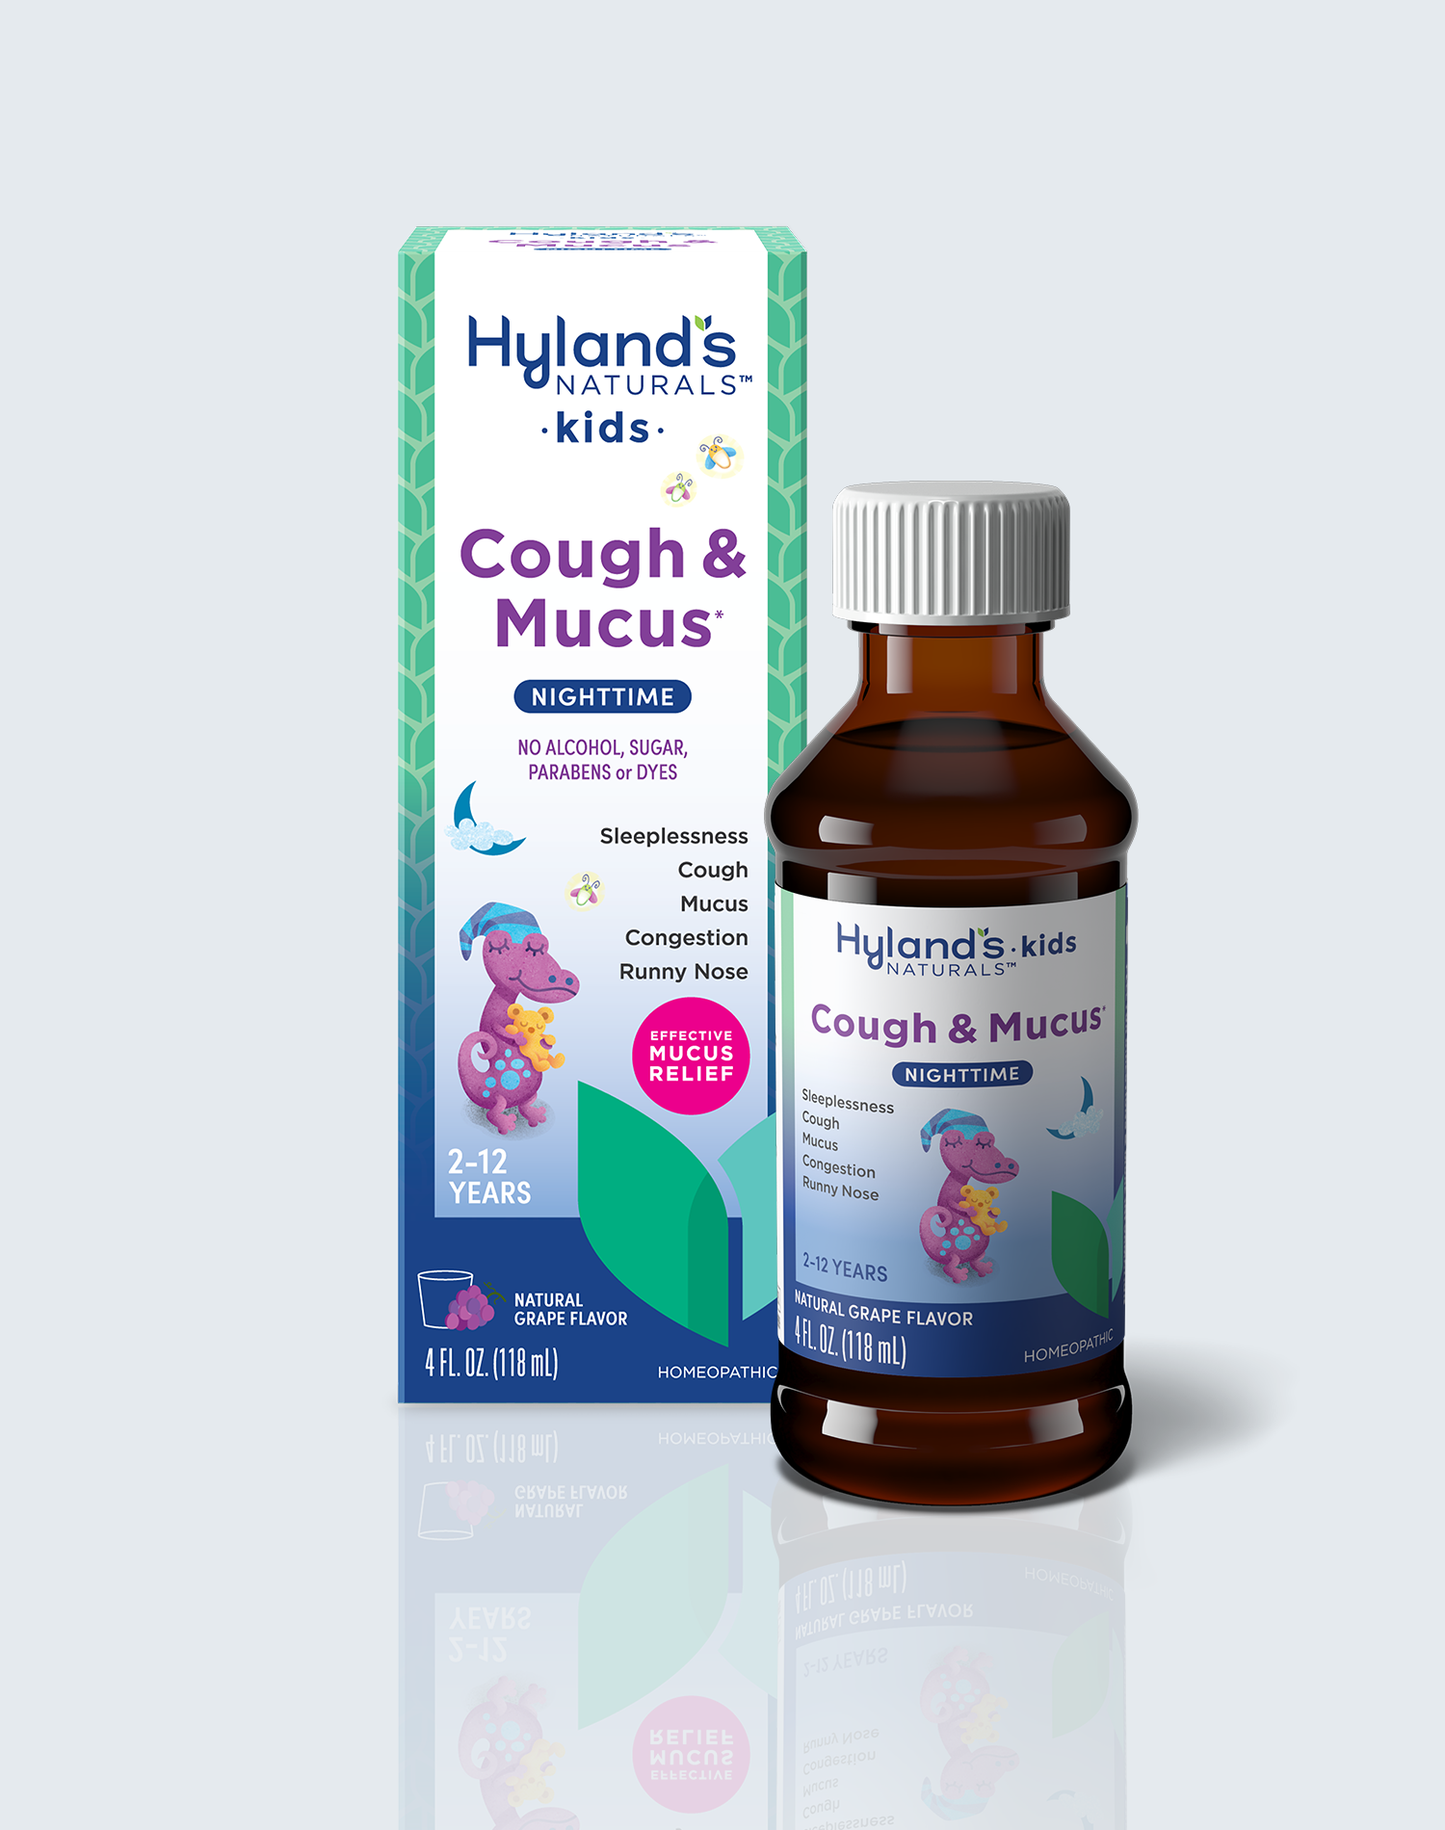 Cough & Mucus Nighttime Packaging